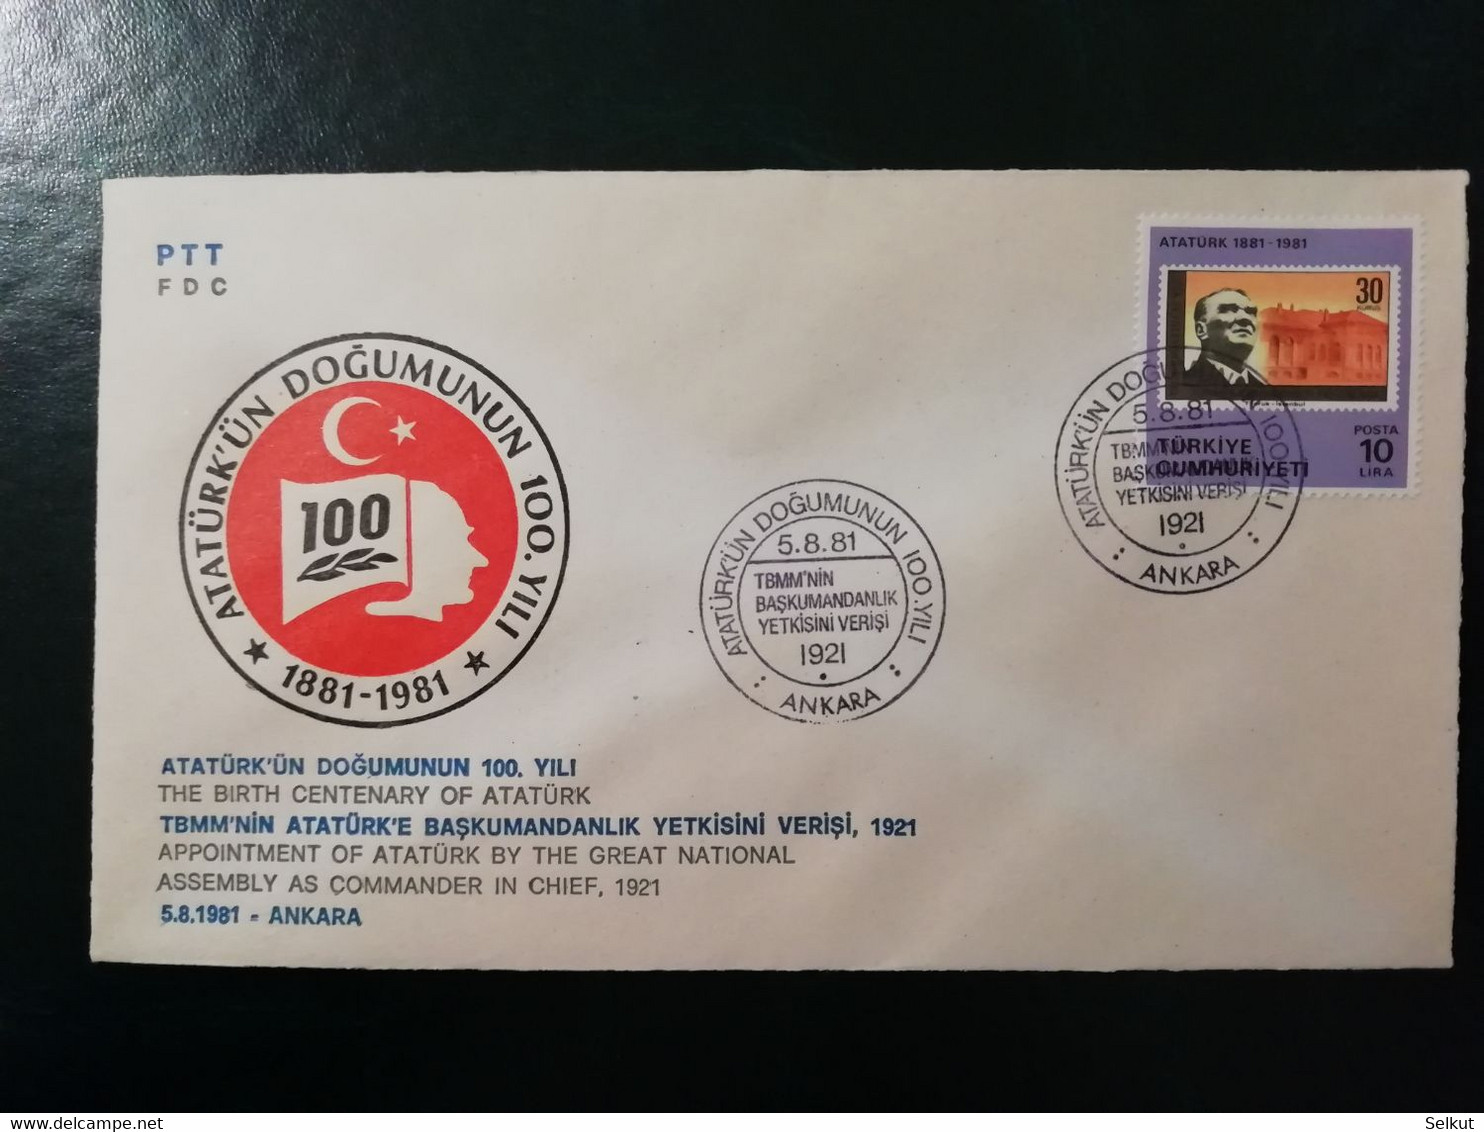 1981 100 YEARS ATATURK BIRTH – APPONTMENT OF ATATURK COMMANDER IN CHIEF 1921 - Lettres & Documents